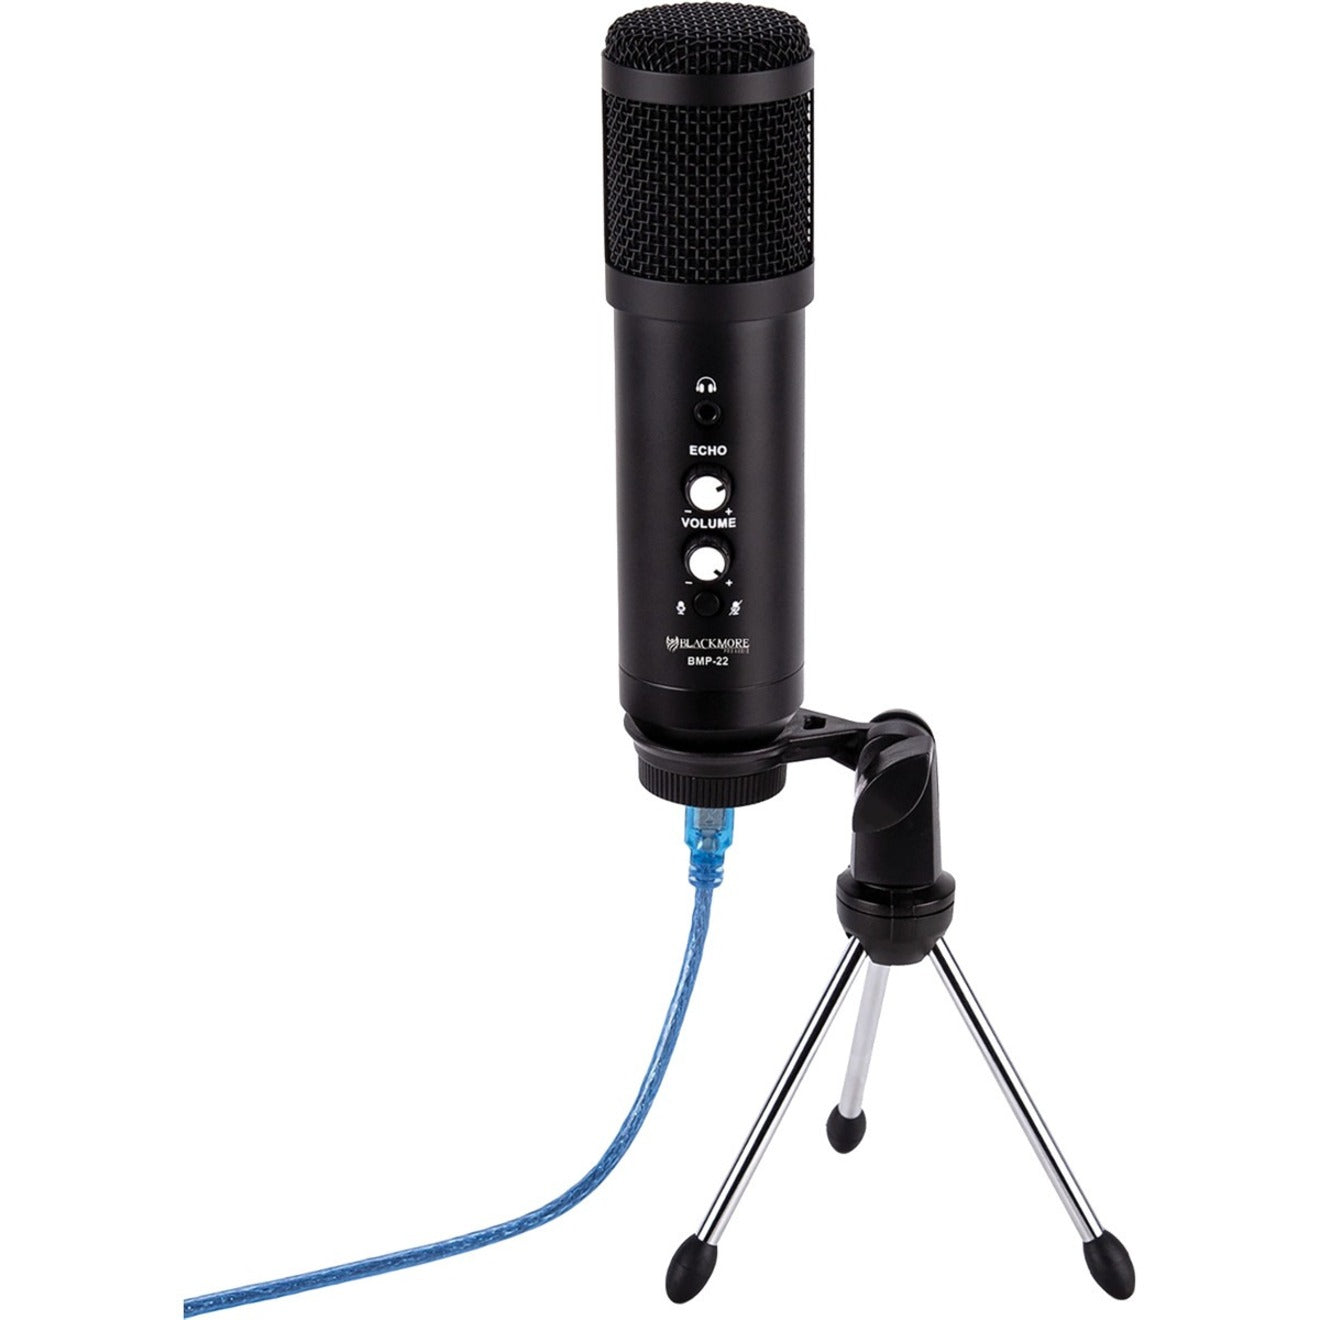 Blackmore BMP-22 Microphone, Wired Condenser with Shock Mount and USB Connectivity